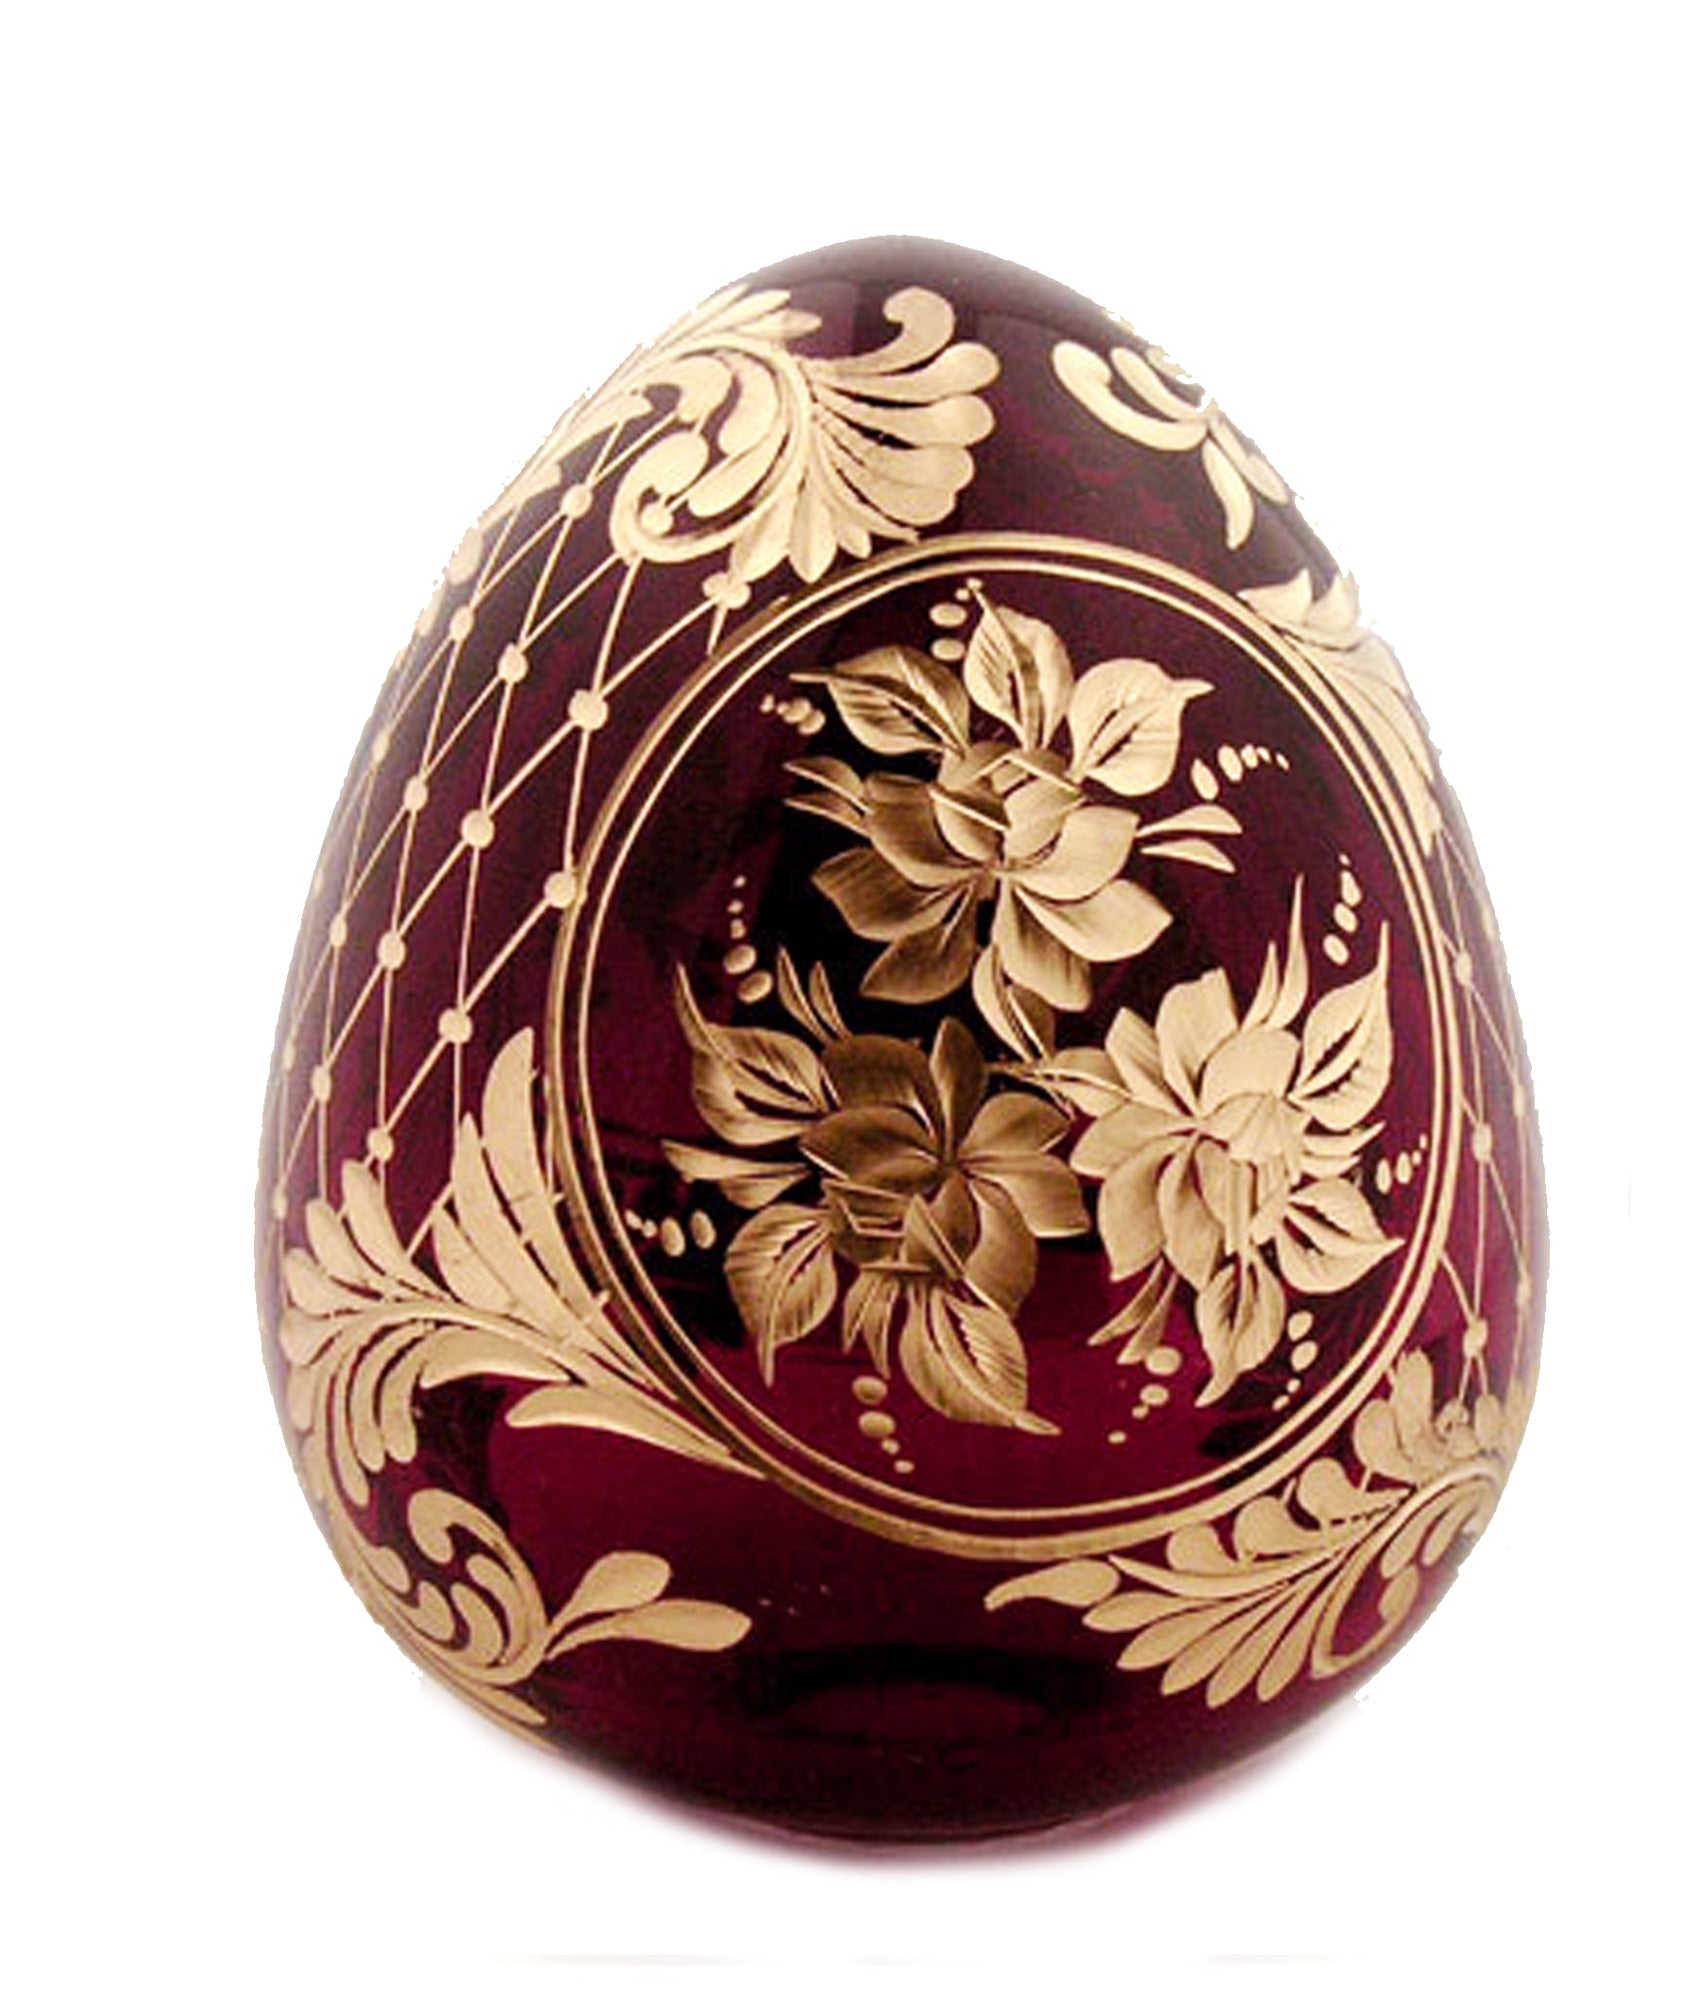 Faberge Style Crystal Egg - Red - Holy Cross Monastery